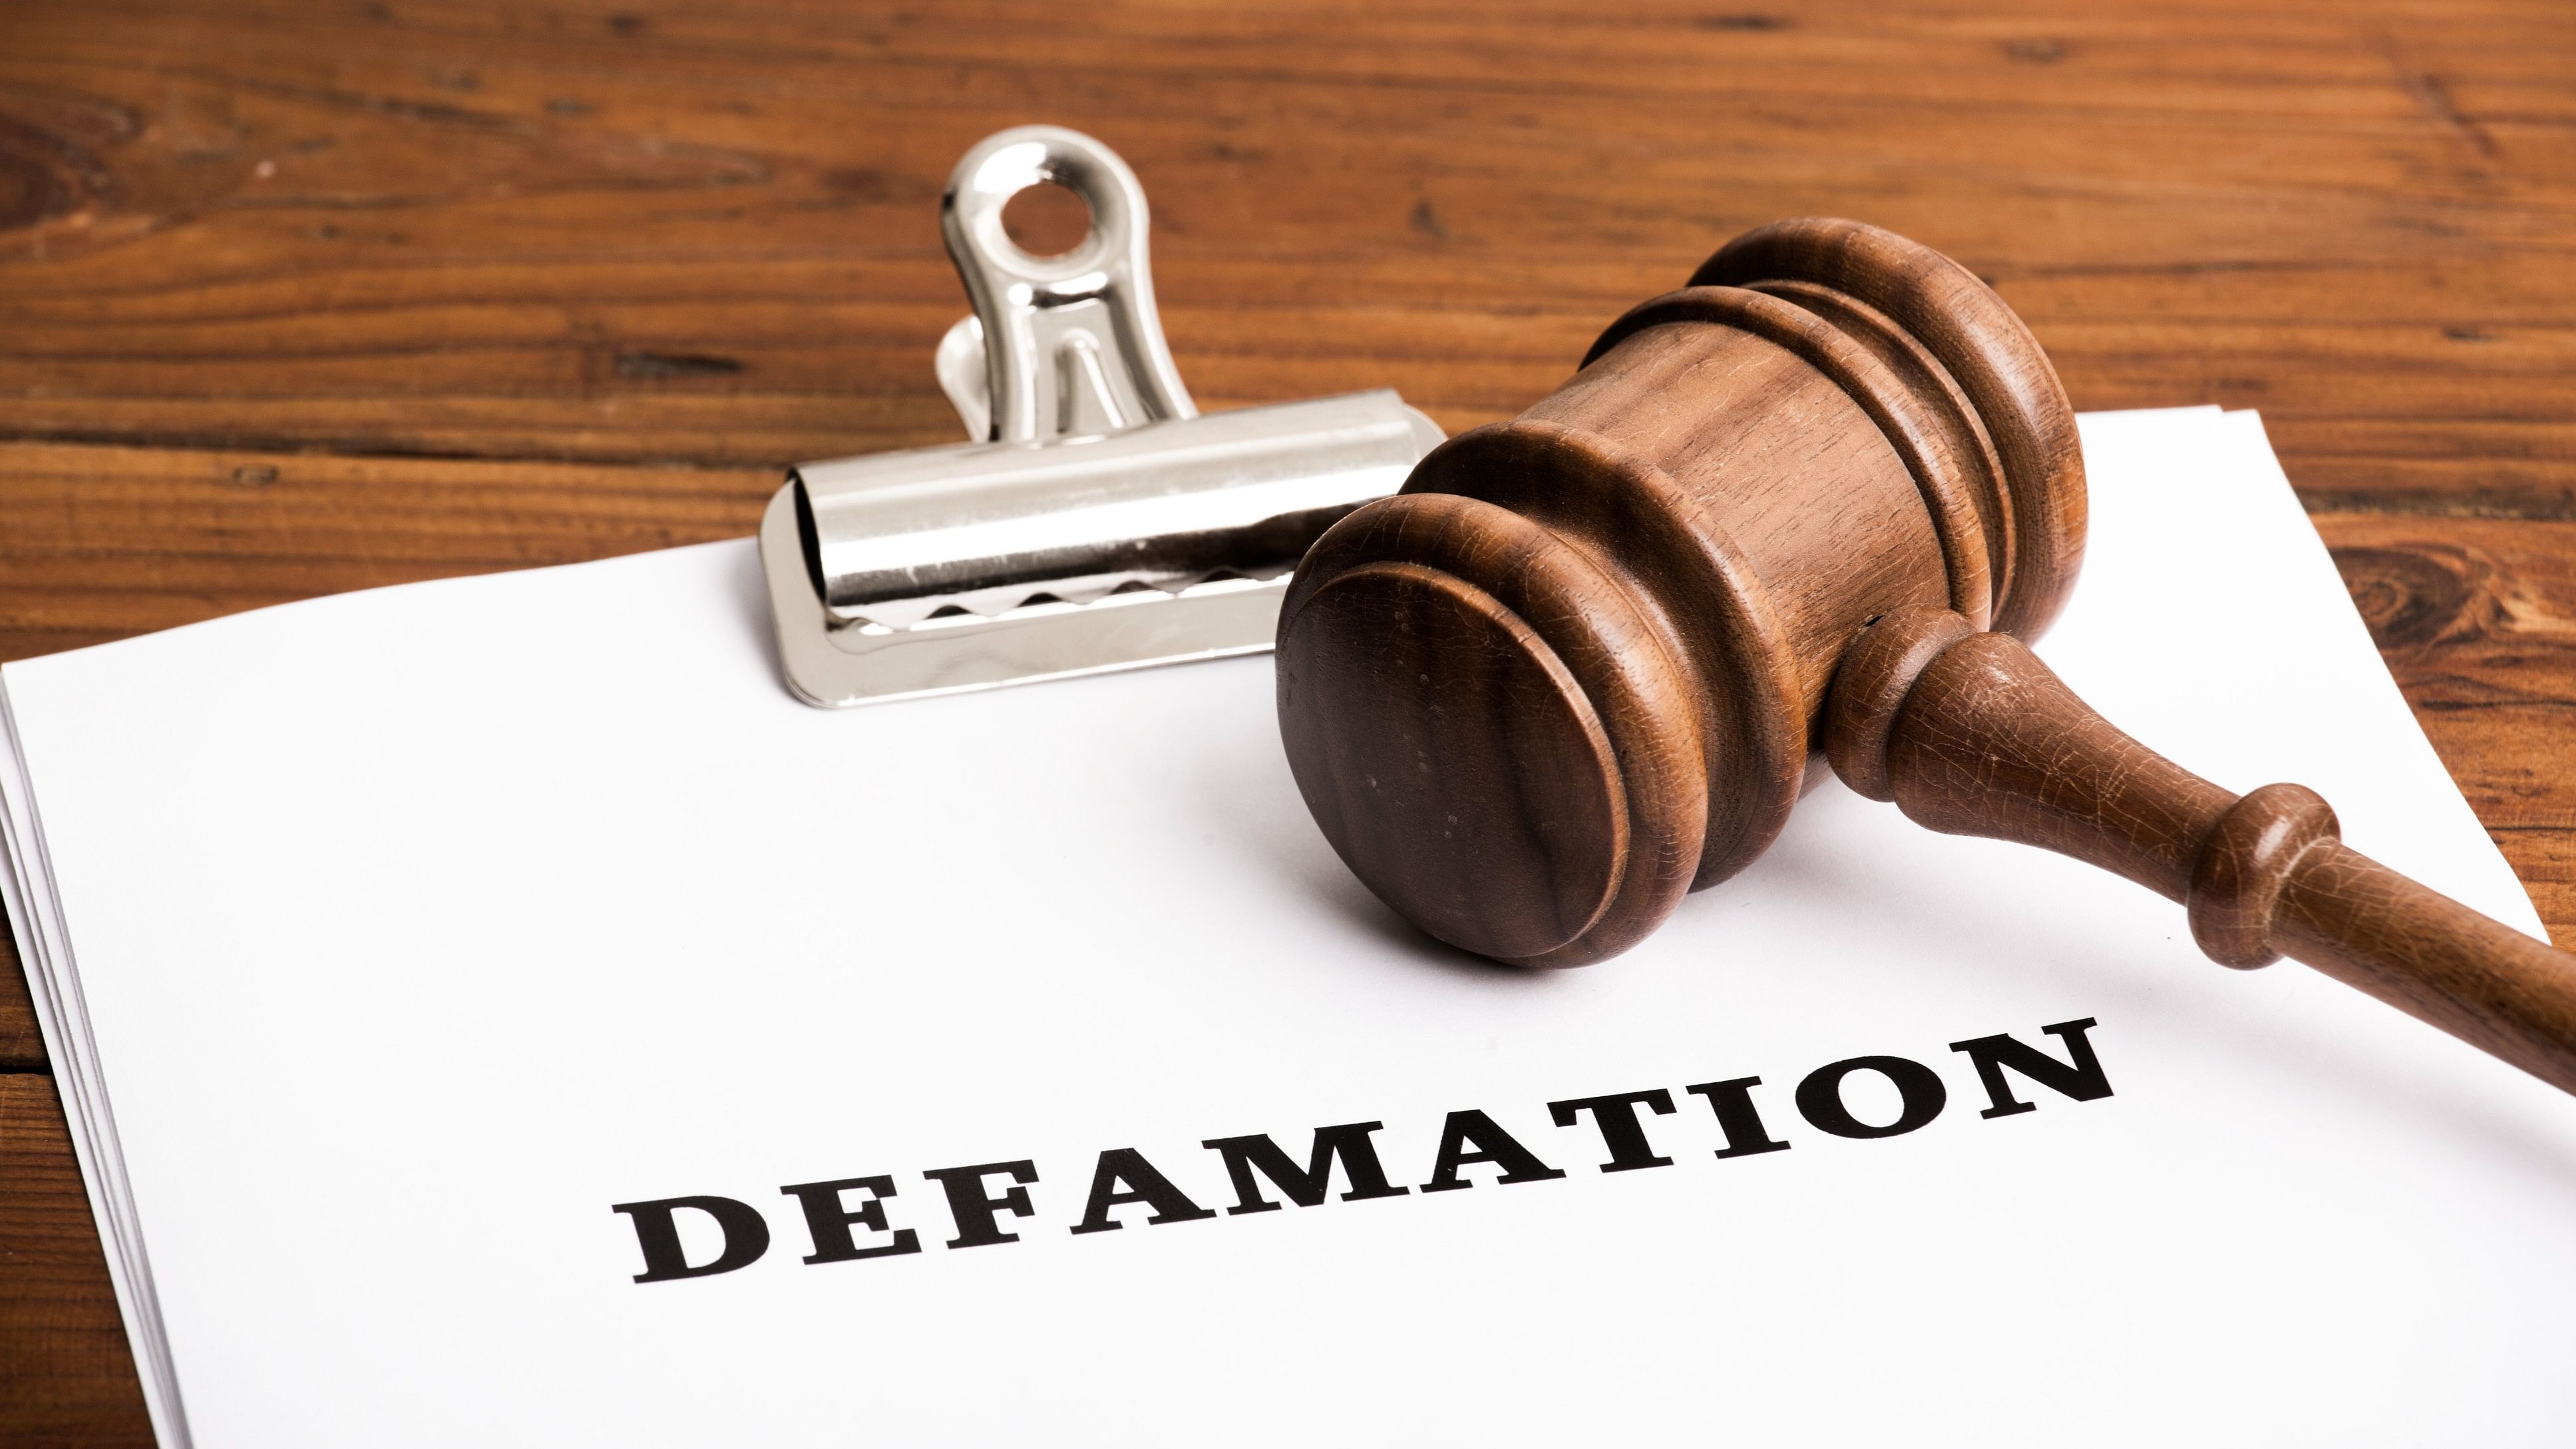 <div class="paragraphs"><p>Defamation file in court with gavel(Representative a=image)</p></div>